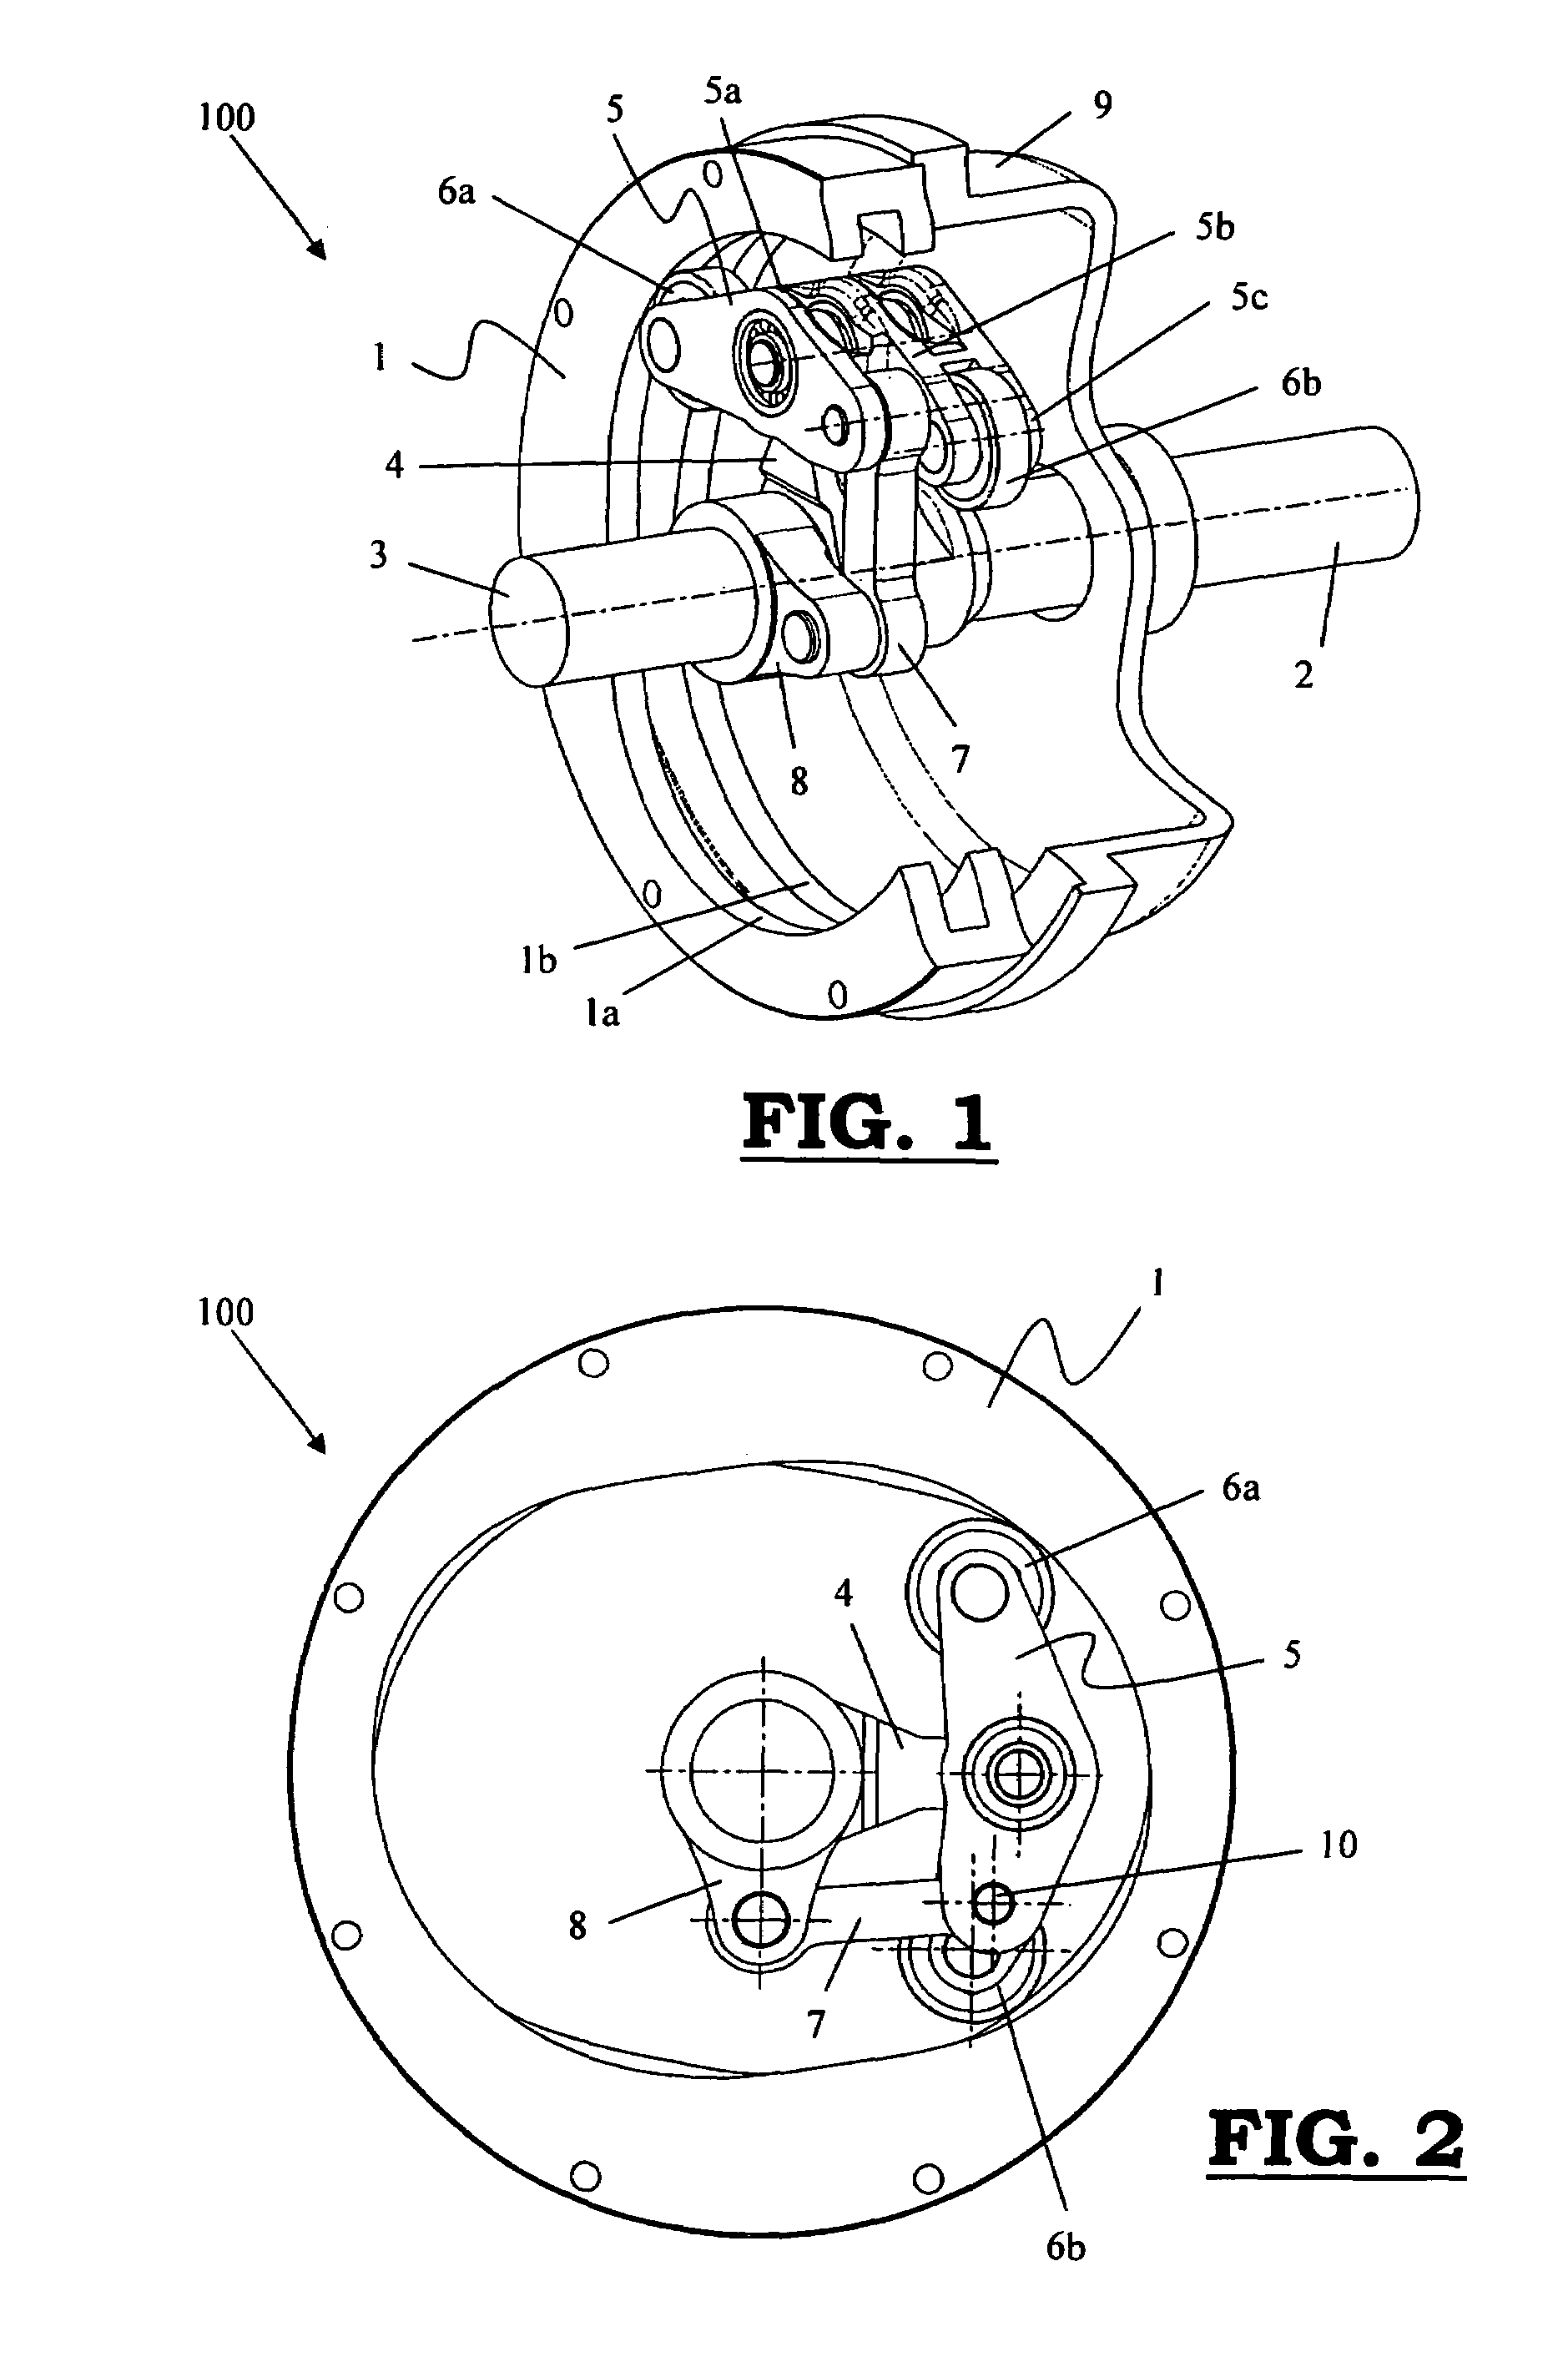 Device for modulating a first rotational motion of an input shaft to a second, different from the first, rotational motion of an output shaft in textile machines